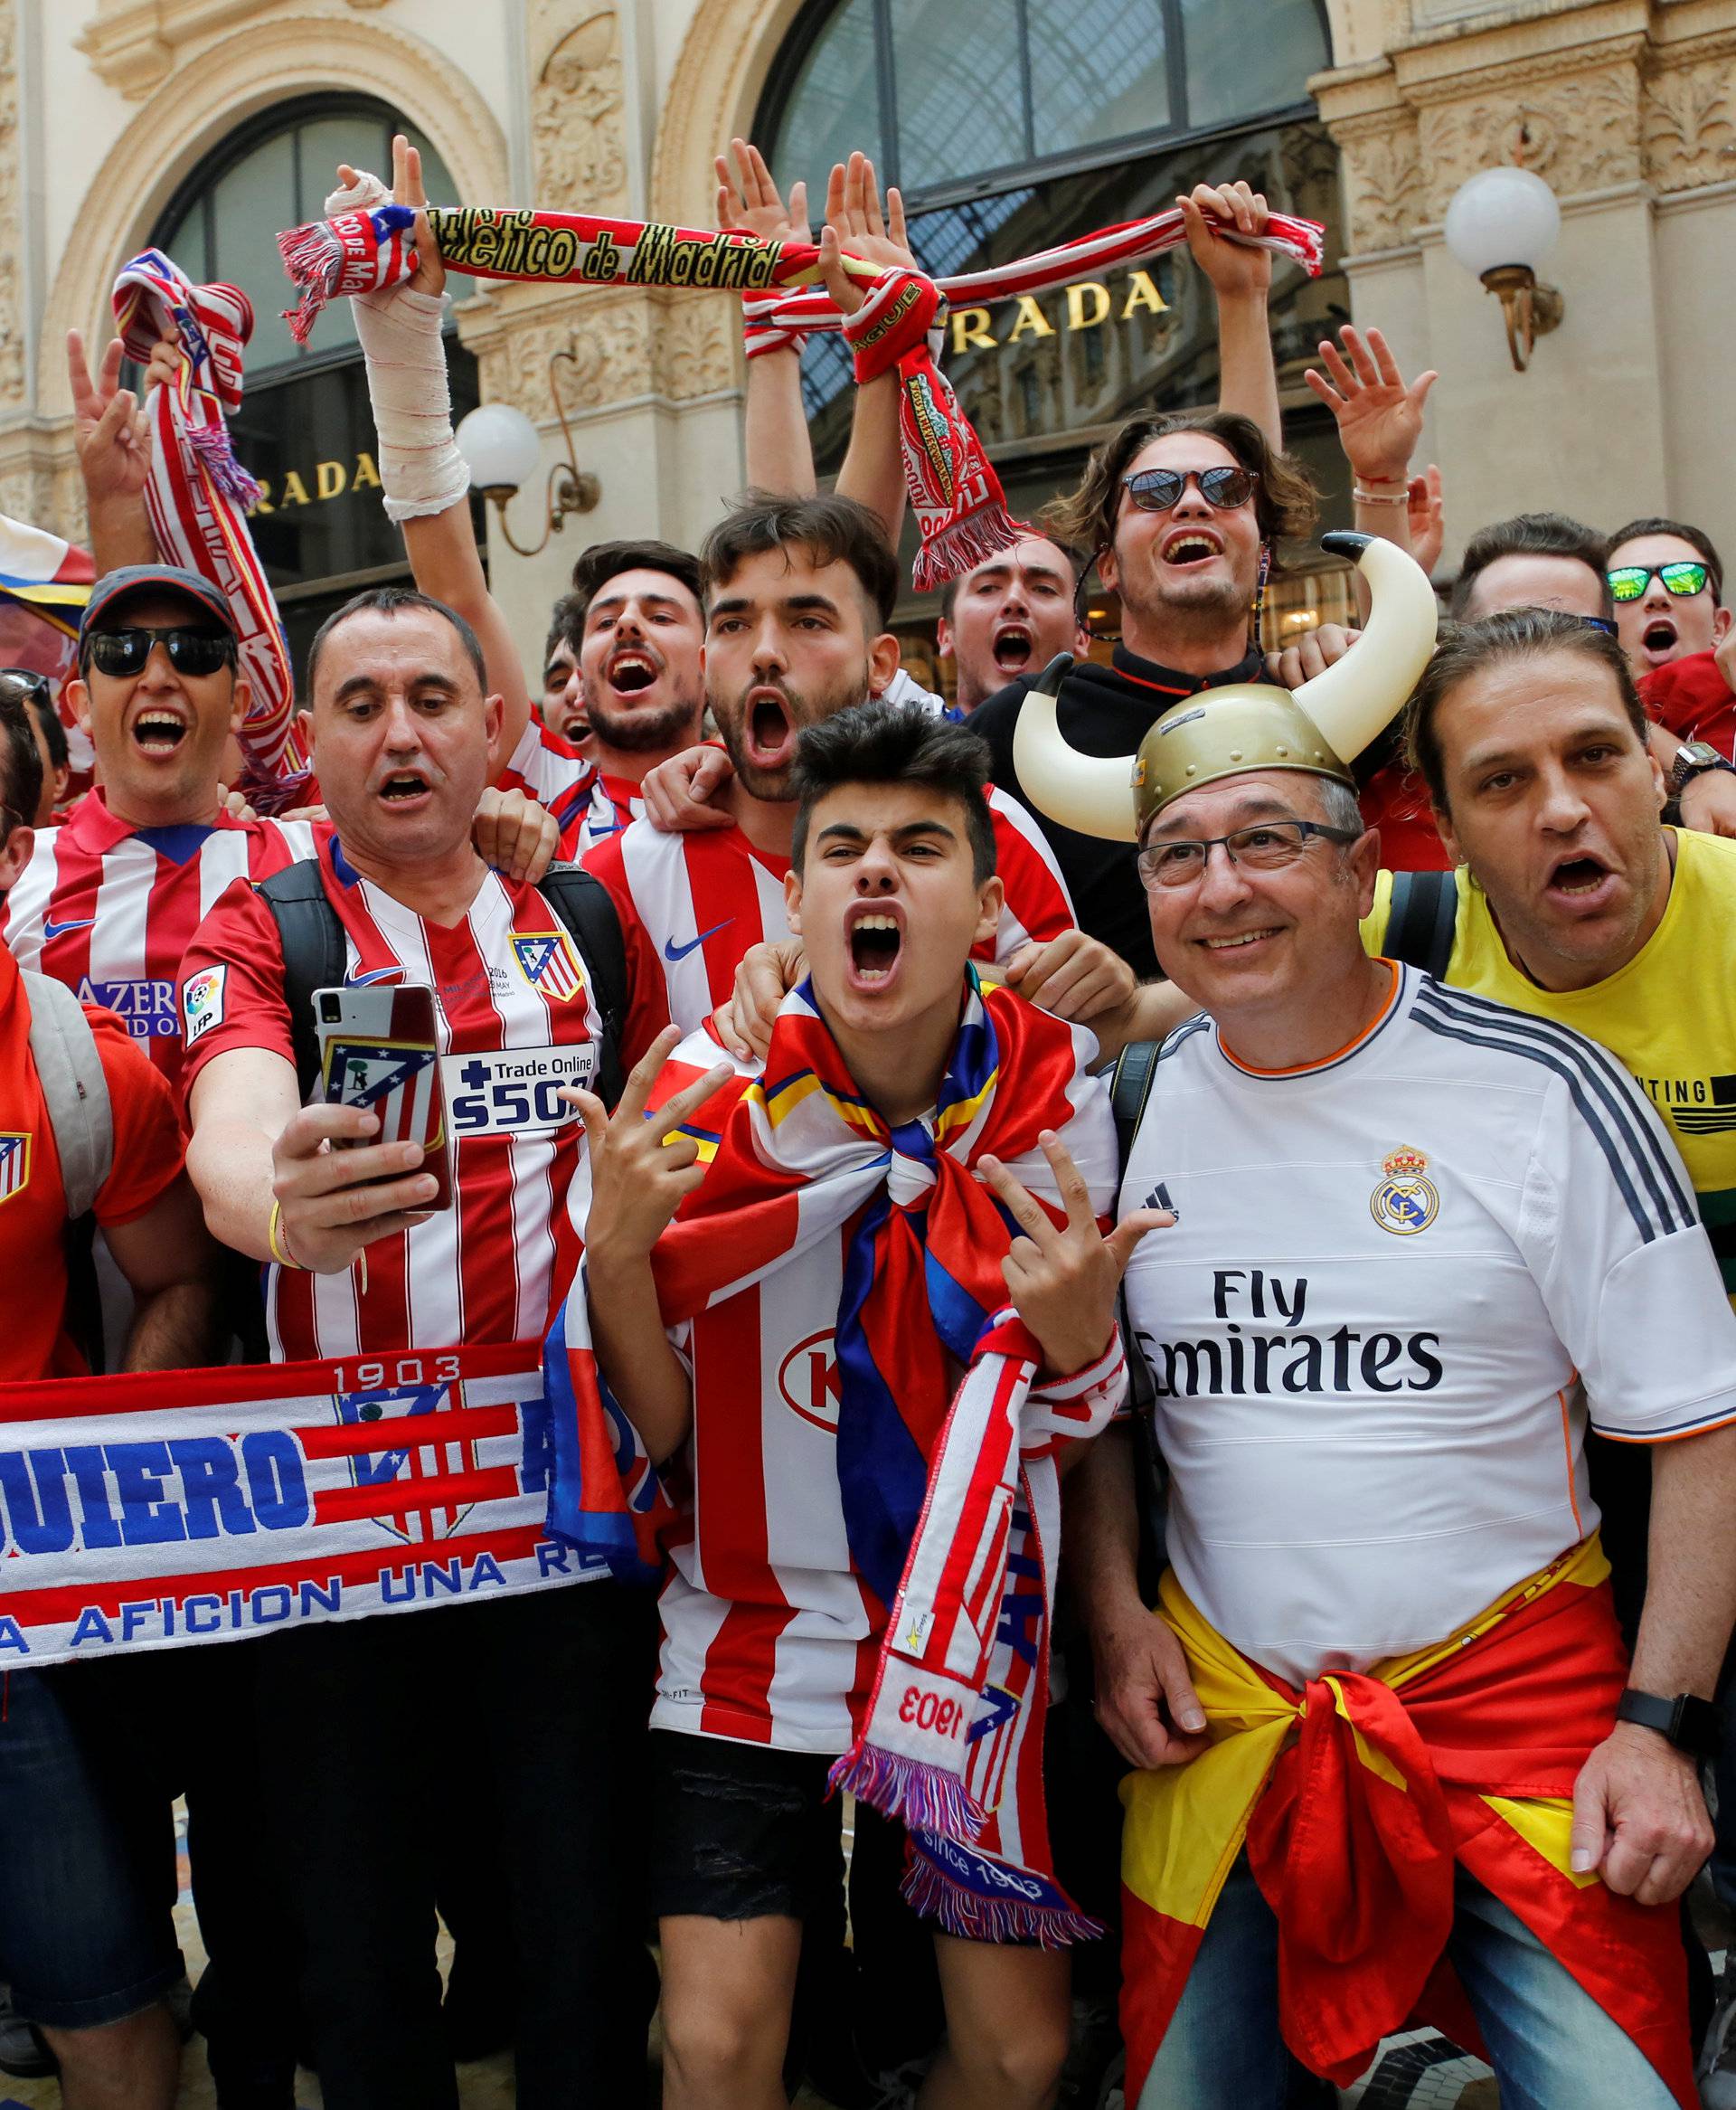 A Real Madrid fan poses with Atletico Madrid fans before the Champions League Final between Real Madrid and Atletico Madrid in Milan